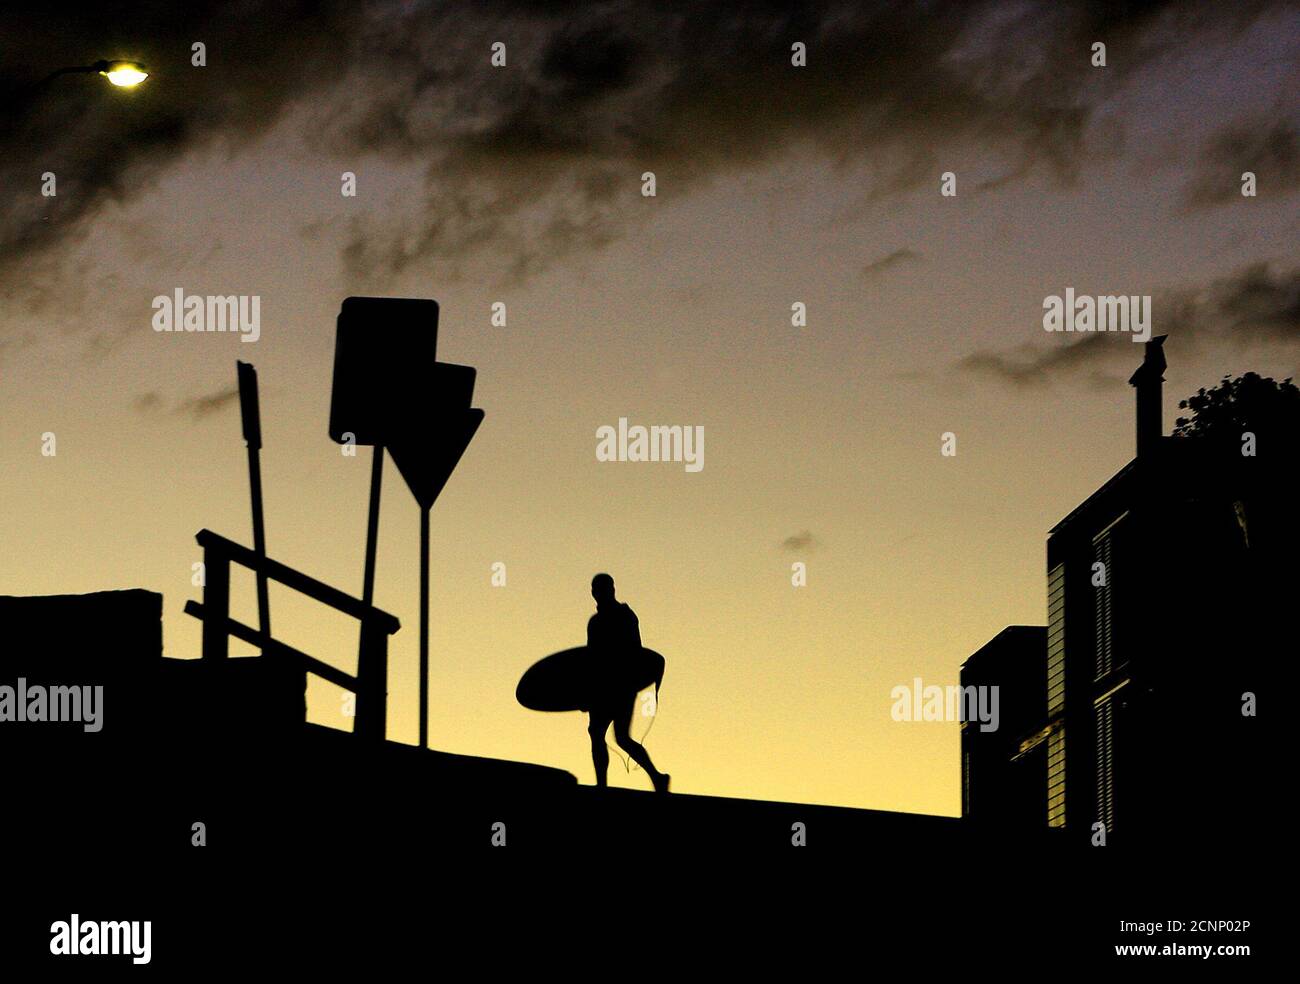 A surfer crosses the road with his board at sunset above Sydney's Bondi Beach June 16, 2005. Many local surfers continue to catch waves at the world-famous beach until well after sunset, and then walk back to their homes in their wetsuits to keep them warm in the winter months. REUTERS/David Gray  DG/TC Stock Photo